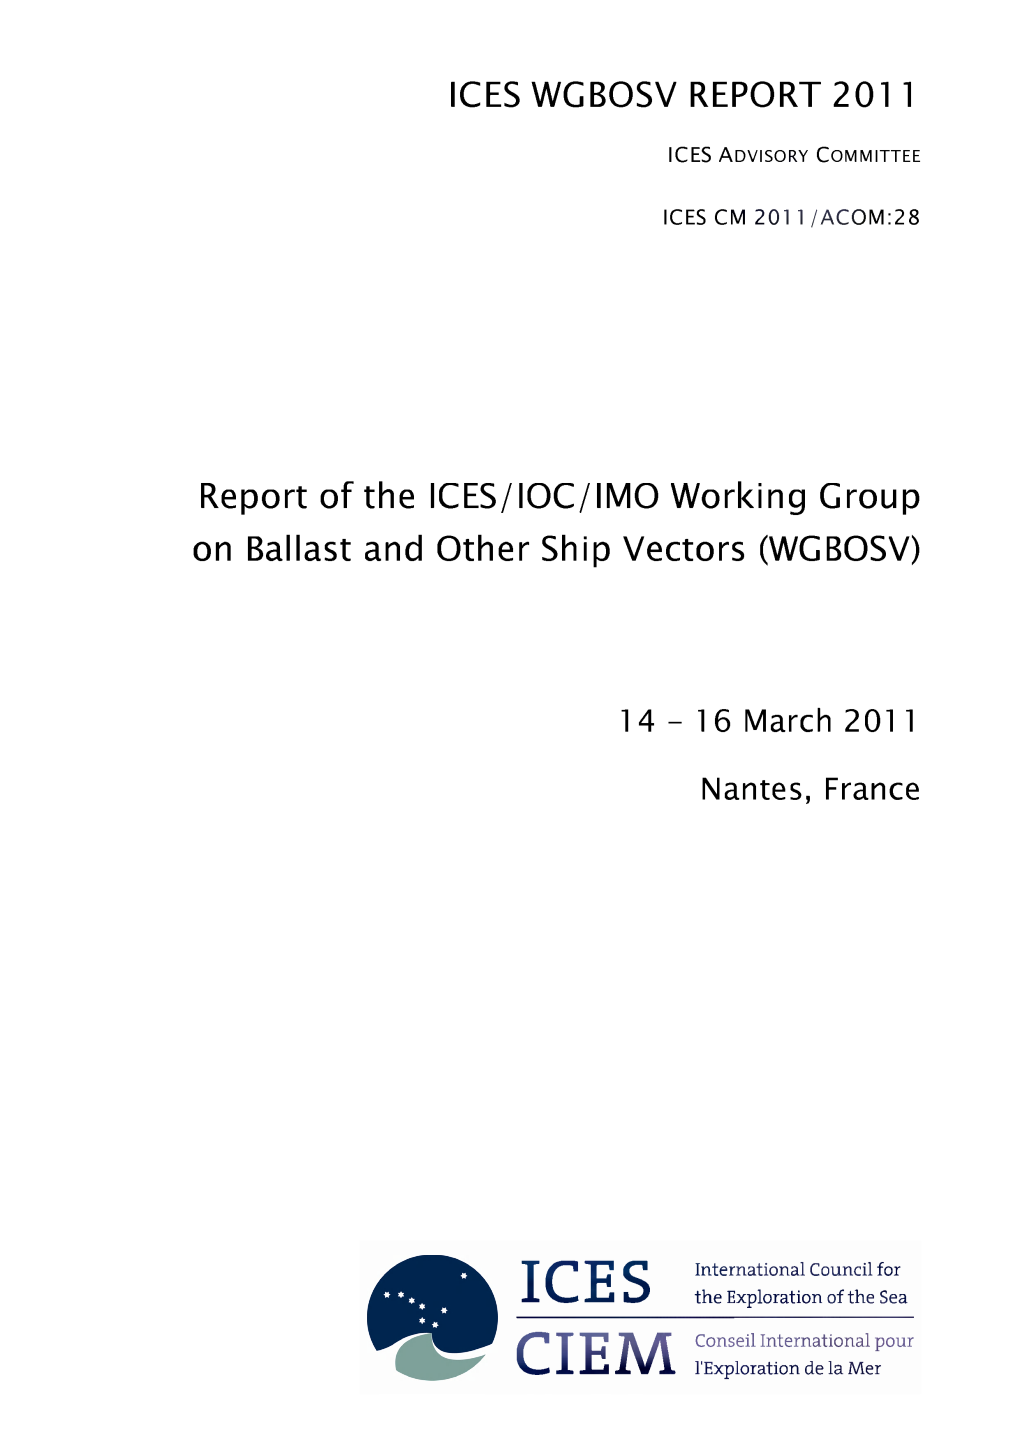 Report of the ICES/IOC/IMO Working Group on Ballast and Other Ship Vectors (WGBOSV)